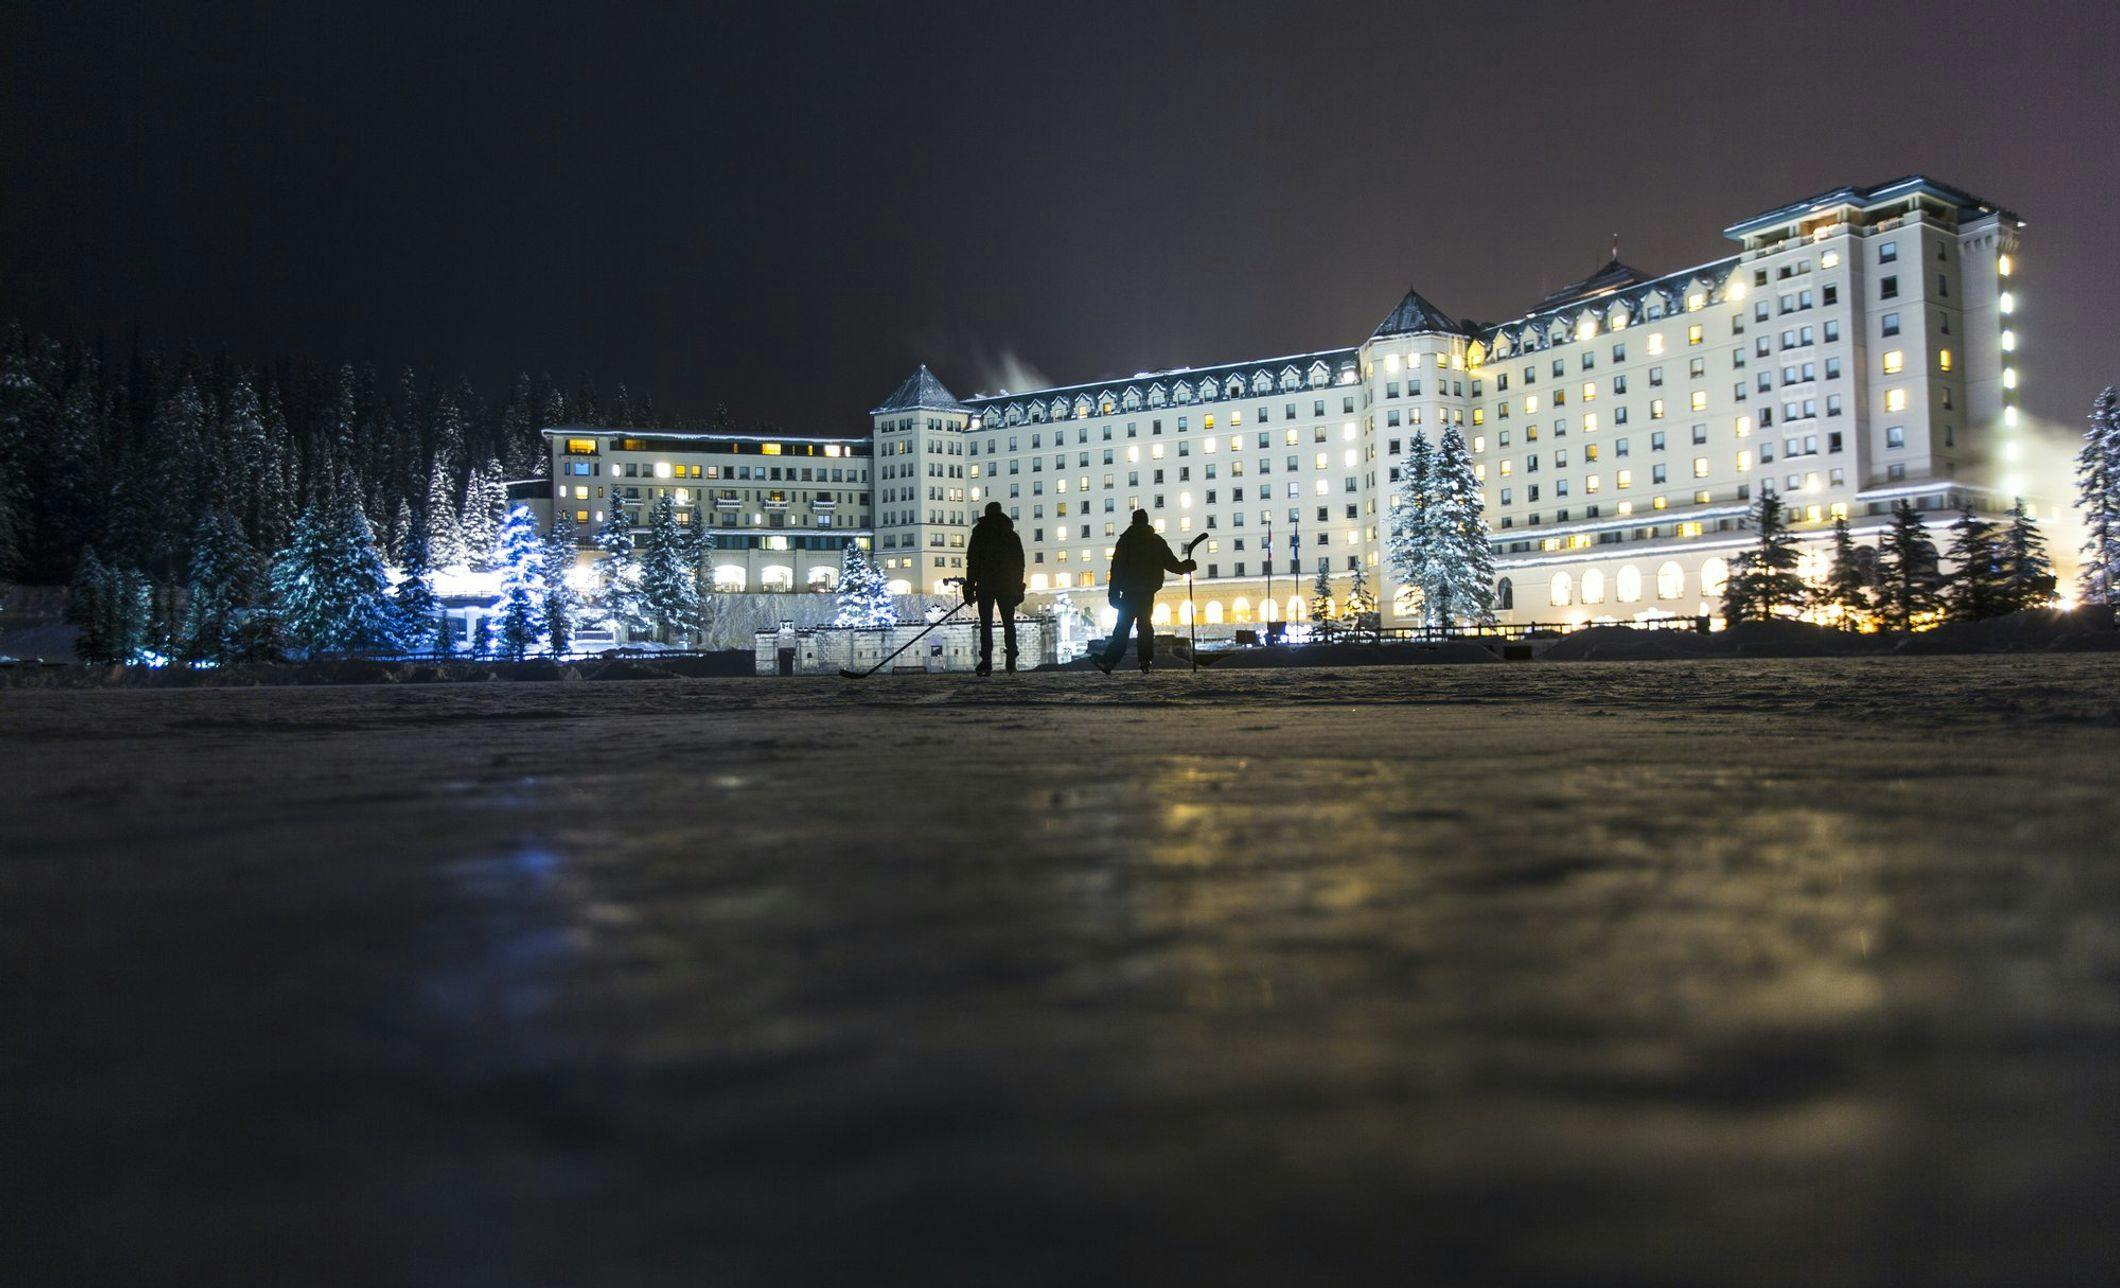 Two figures are illuminated skating on a frozen lake with a large and well lit hotel in the background. Christmas lights can be seen along the lakeshore